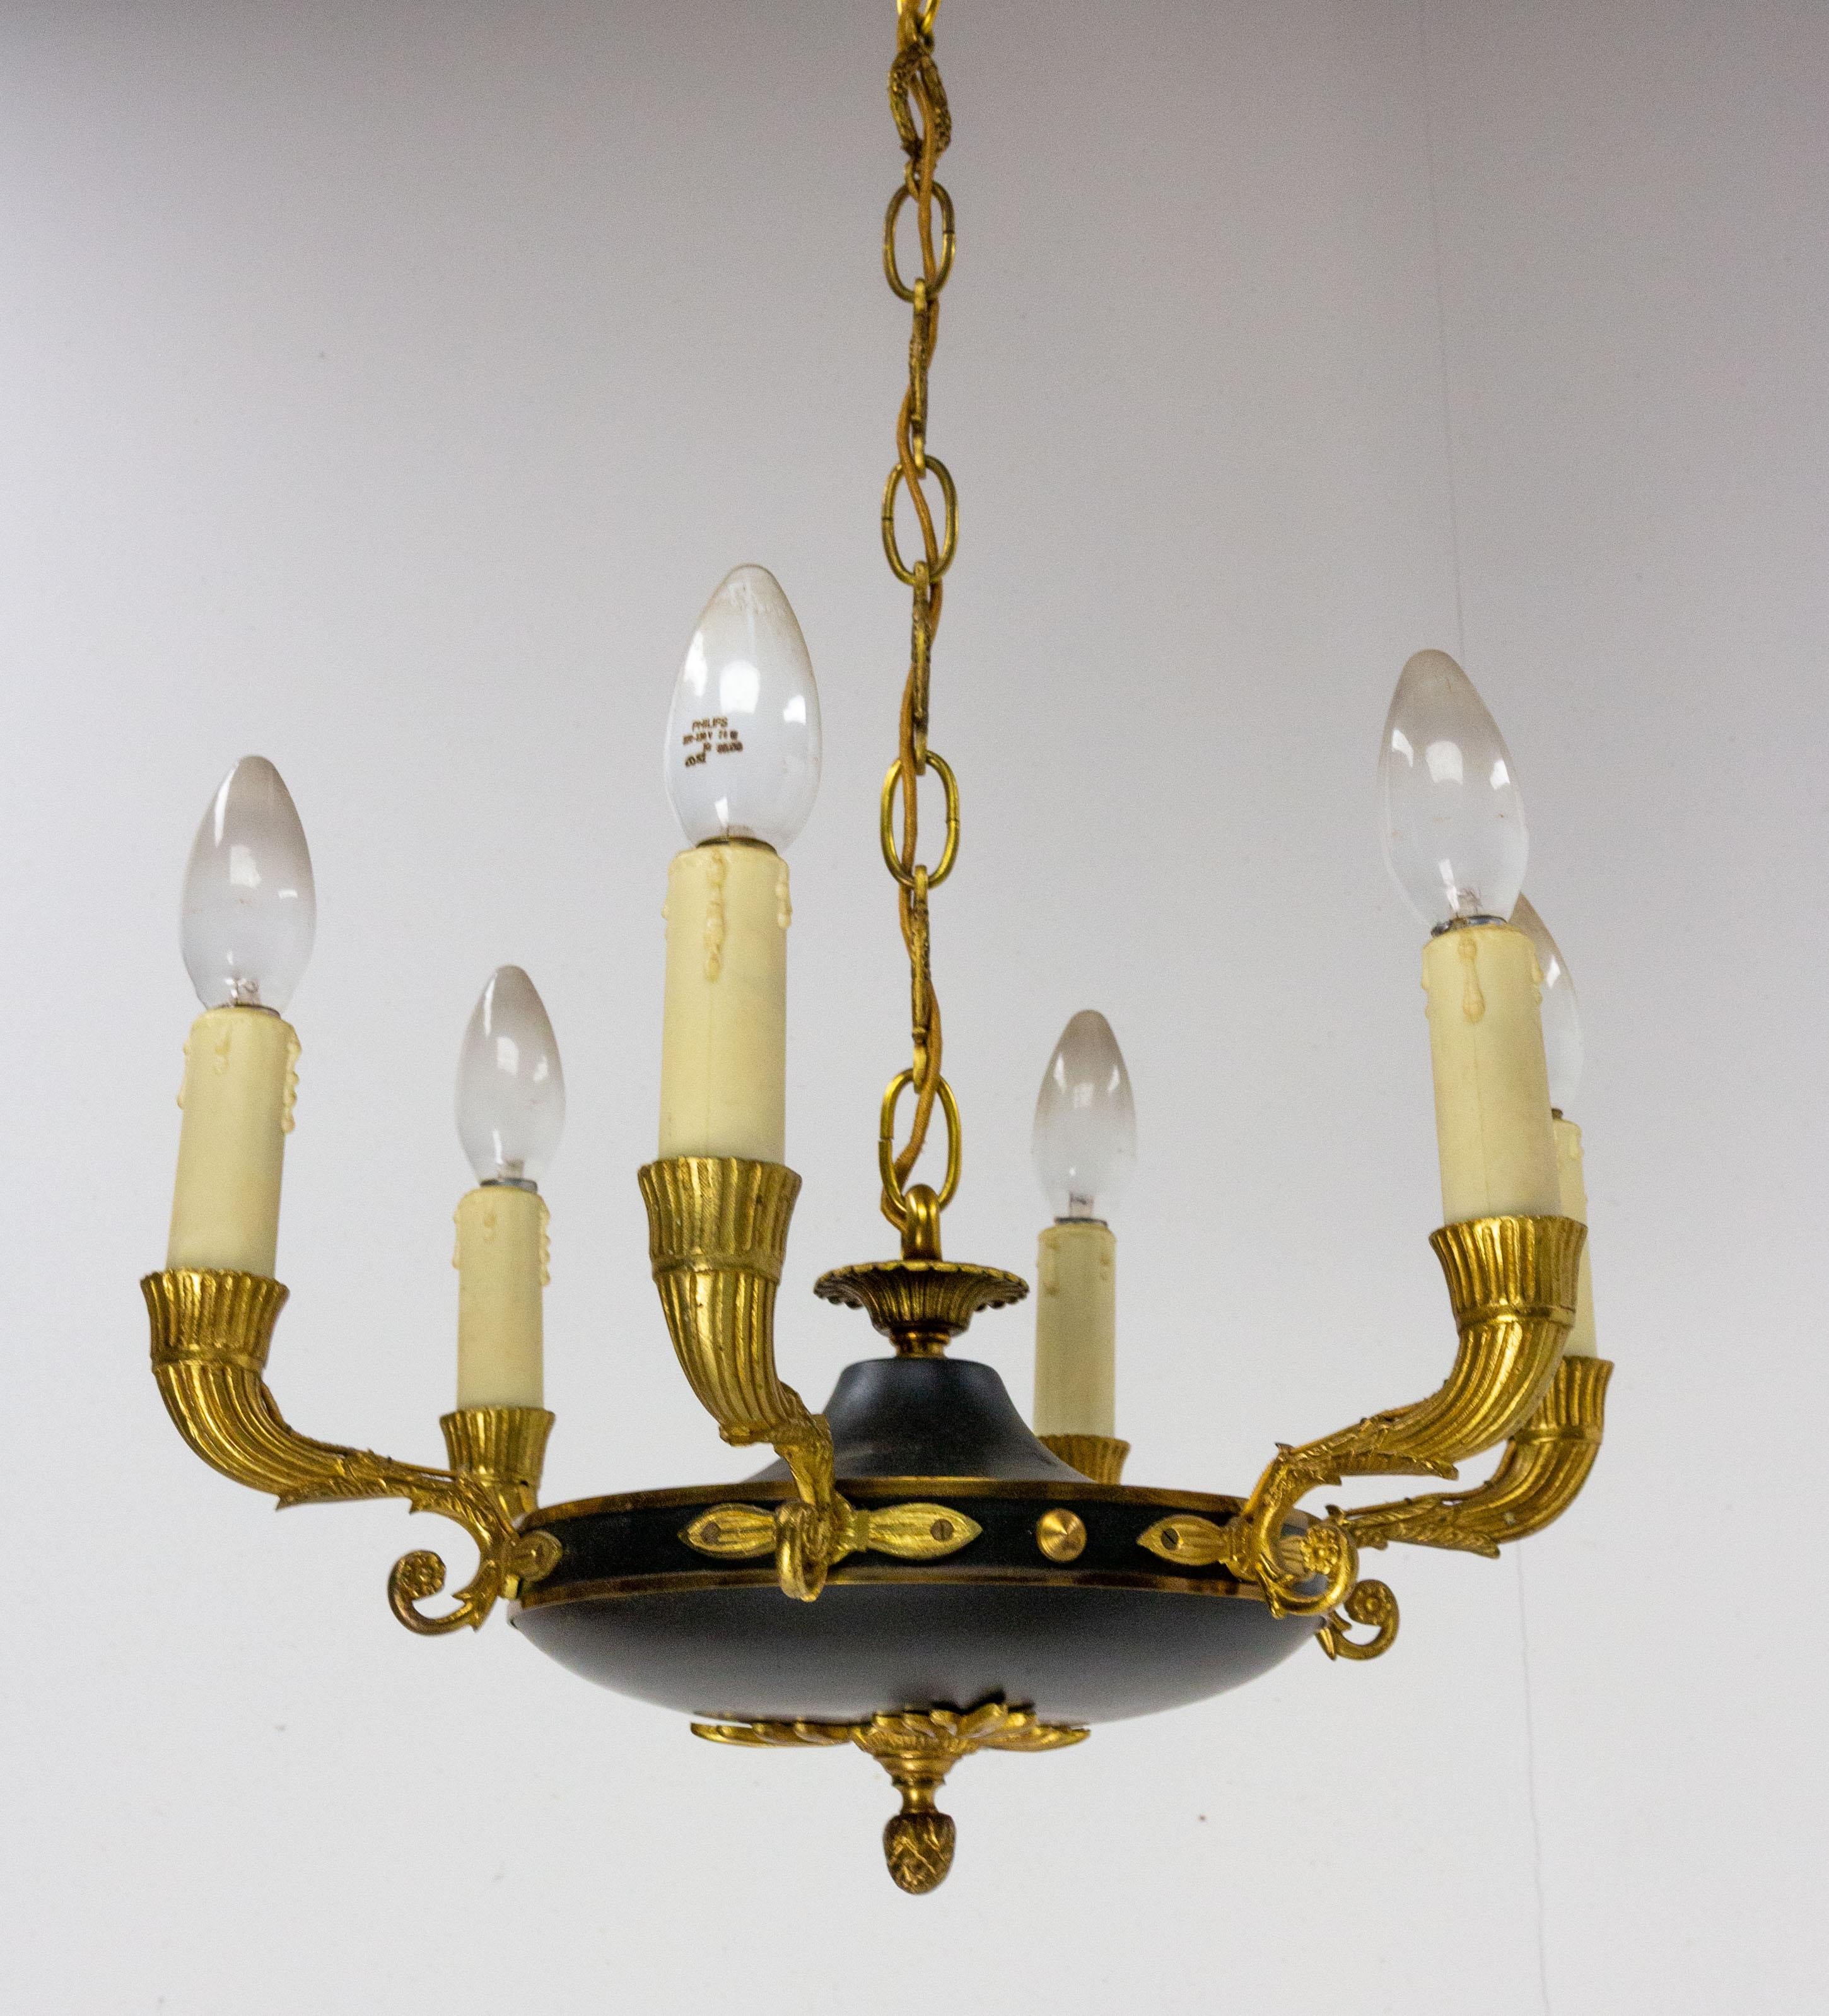 Empire revival chandelier arms manner of Maison Jansen
Gilt bronze
Very good vintage condition.
This can be rewired to USA or EU and UK standards.

Shipping:
Diam 63, H 40.5 cm